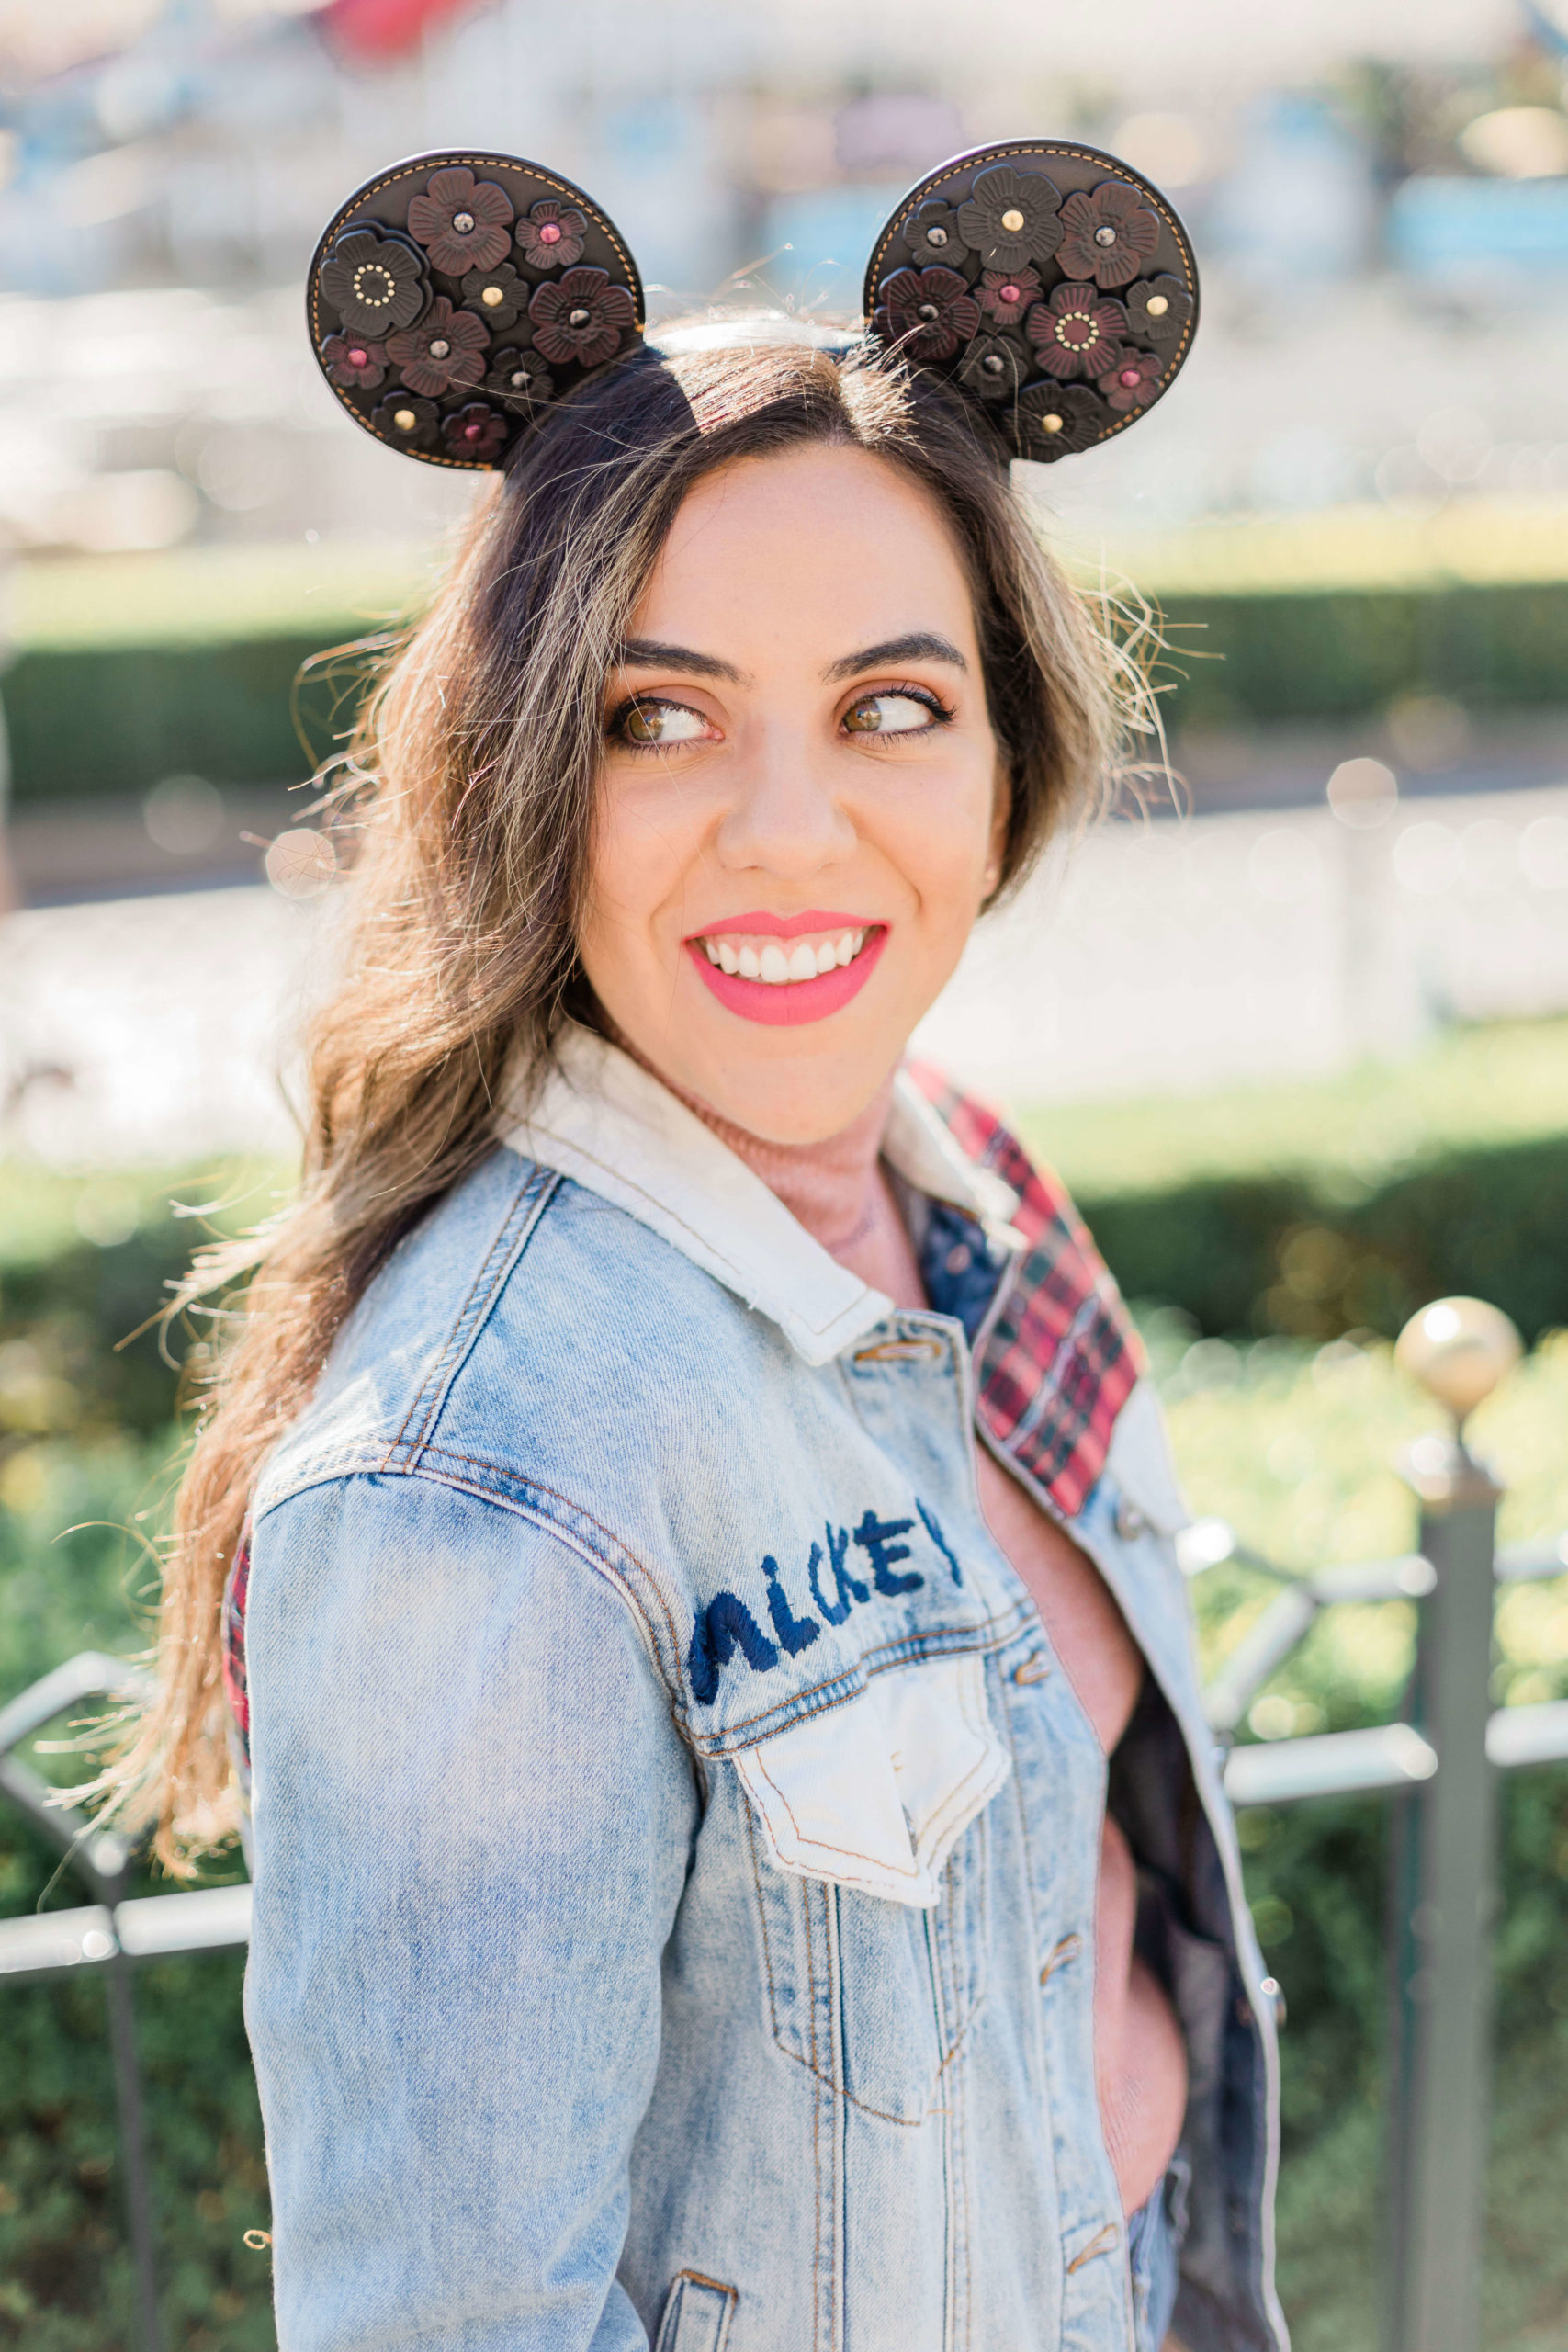 I love to create Disneyland Styled Outfits. It is so fun to come up with creative ways to express my love for Disney with a side of magic! Winter version.